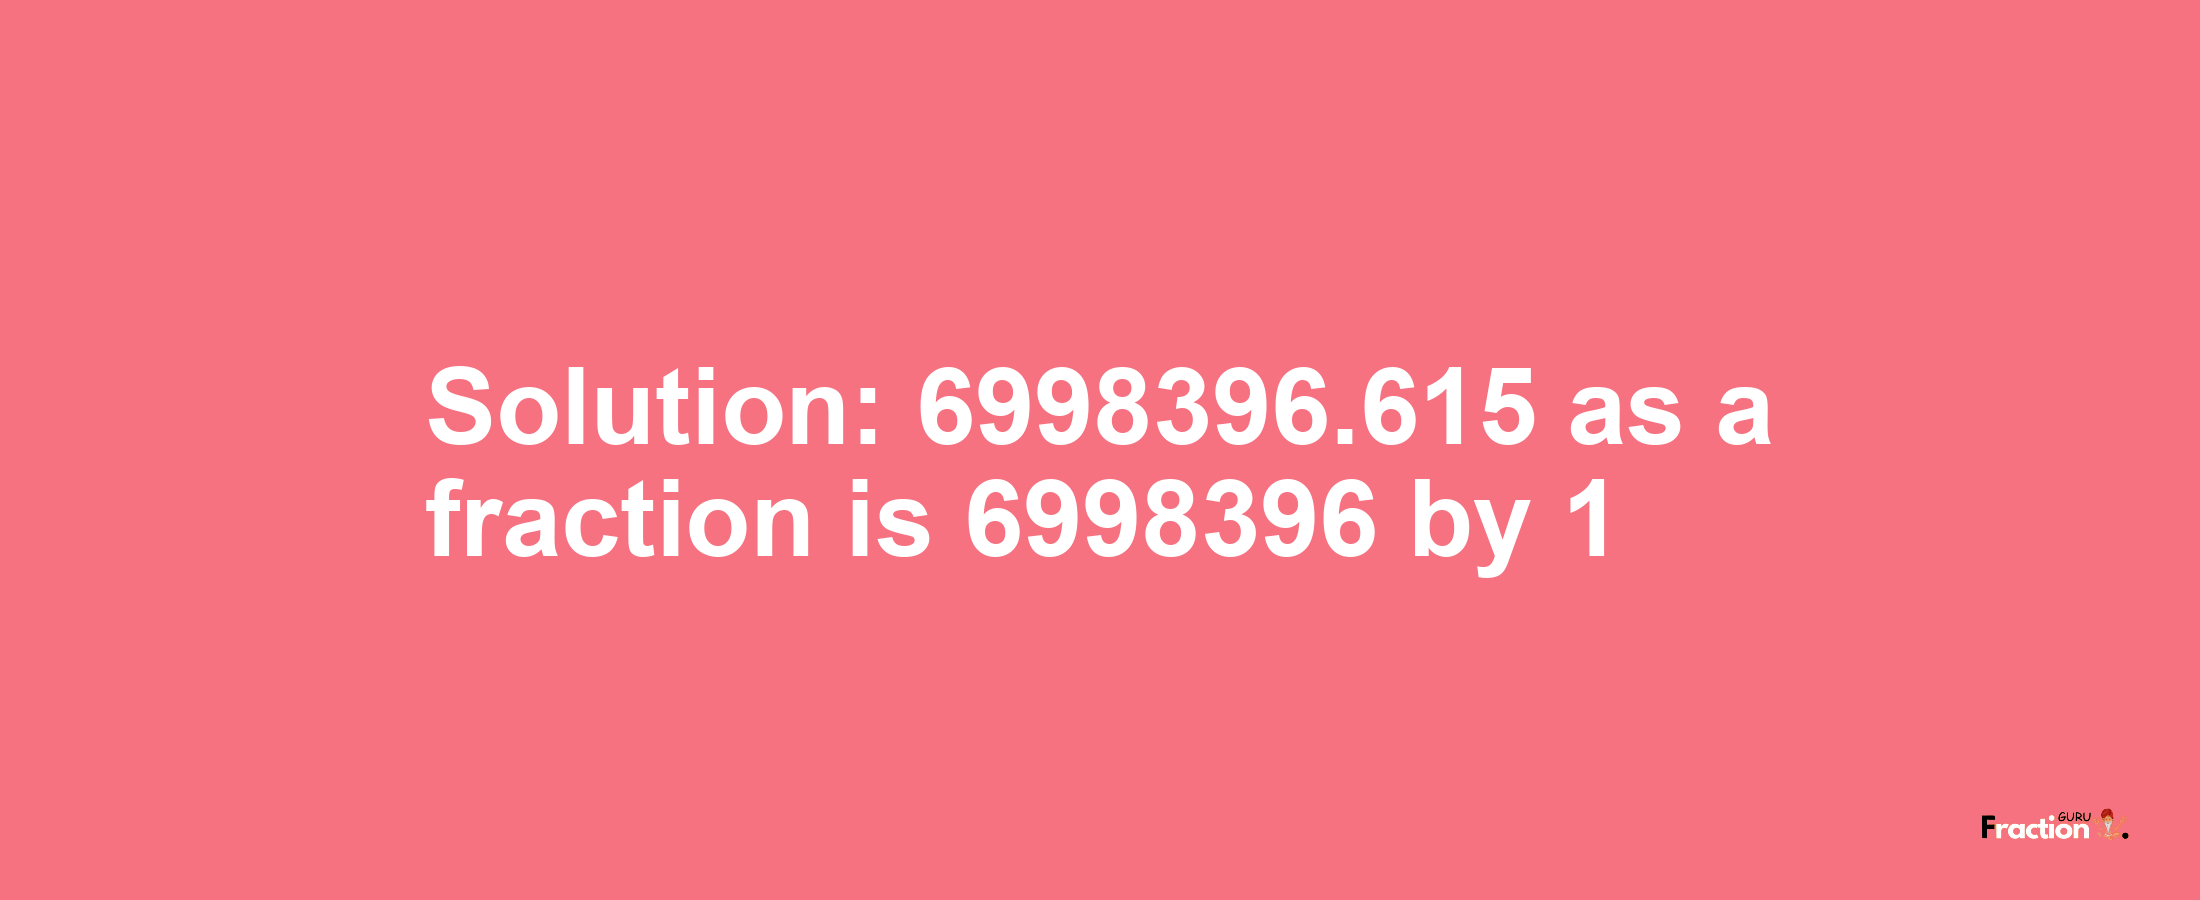 Solution:6998396.615 as a fraction is 6998396/1